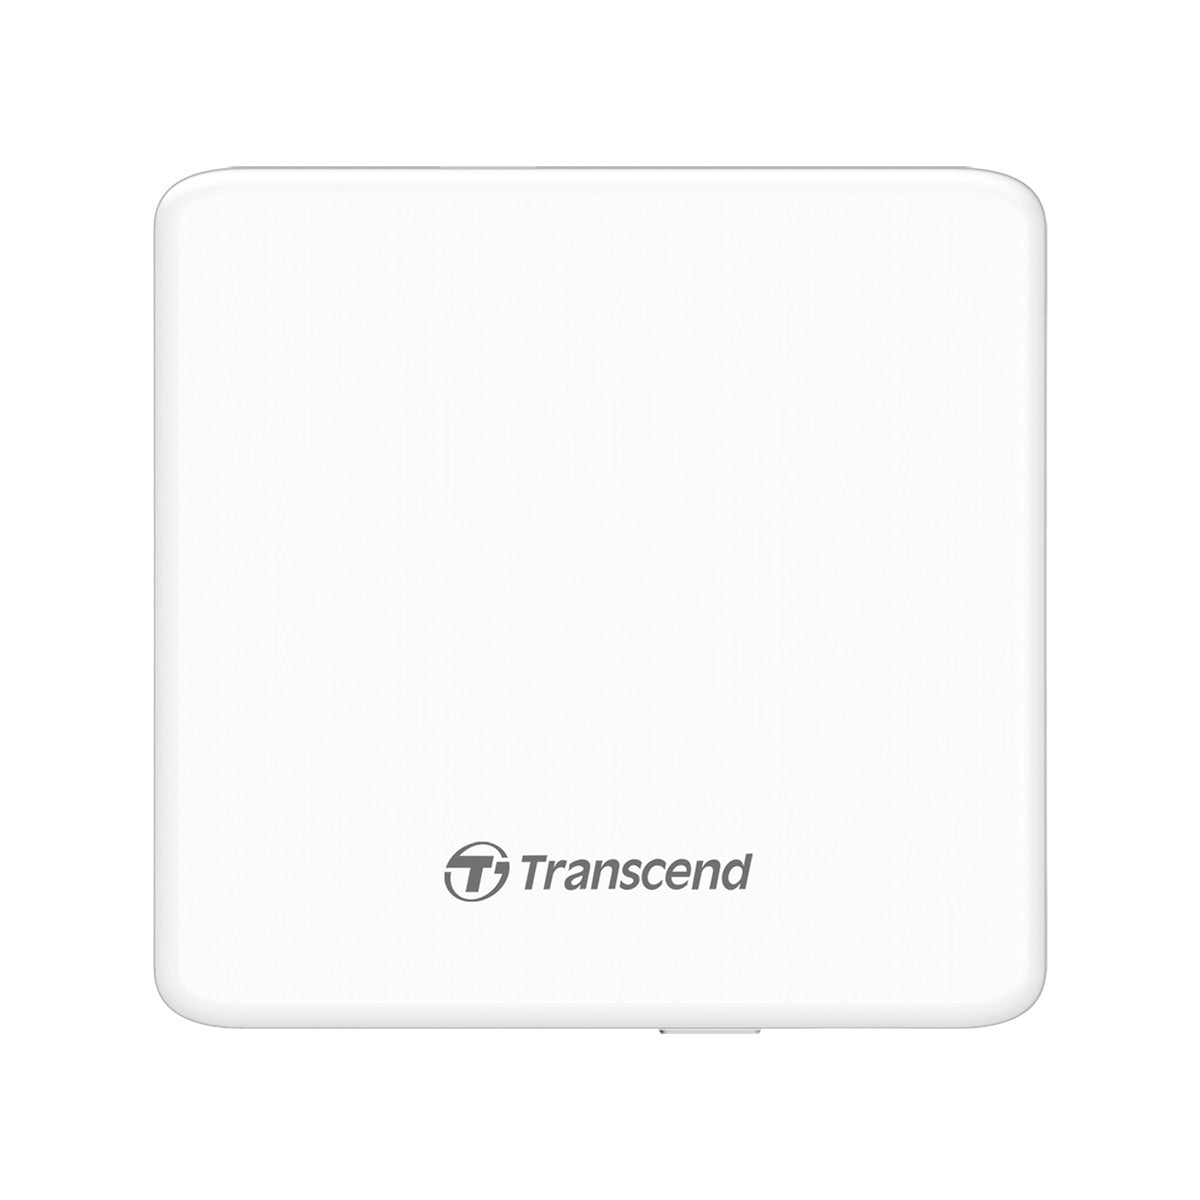 Transcend Portable USB DVD writer 燒碟機 燒碟機 Microworks Online Store